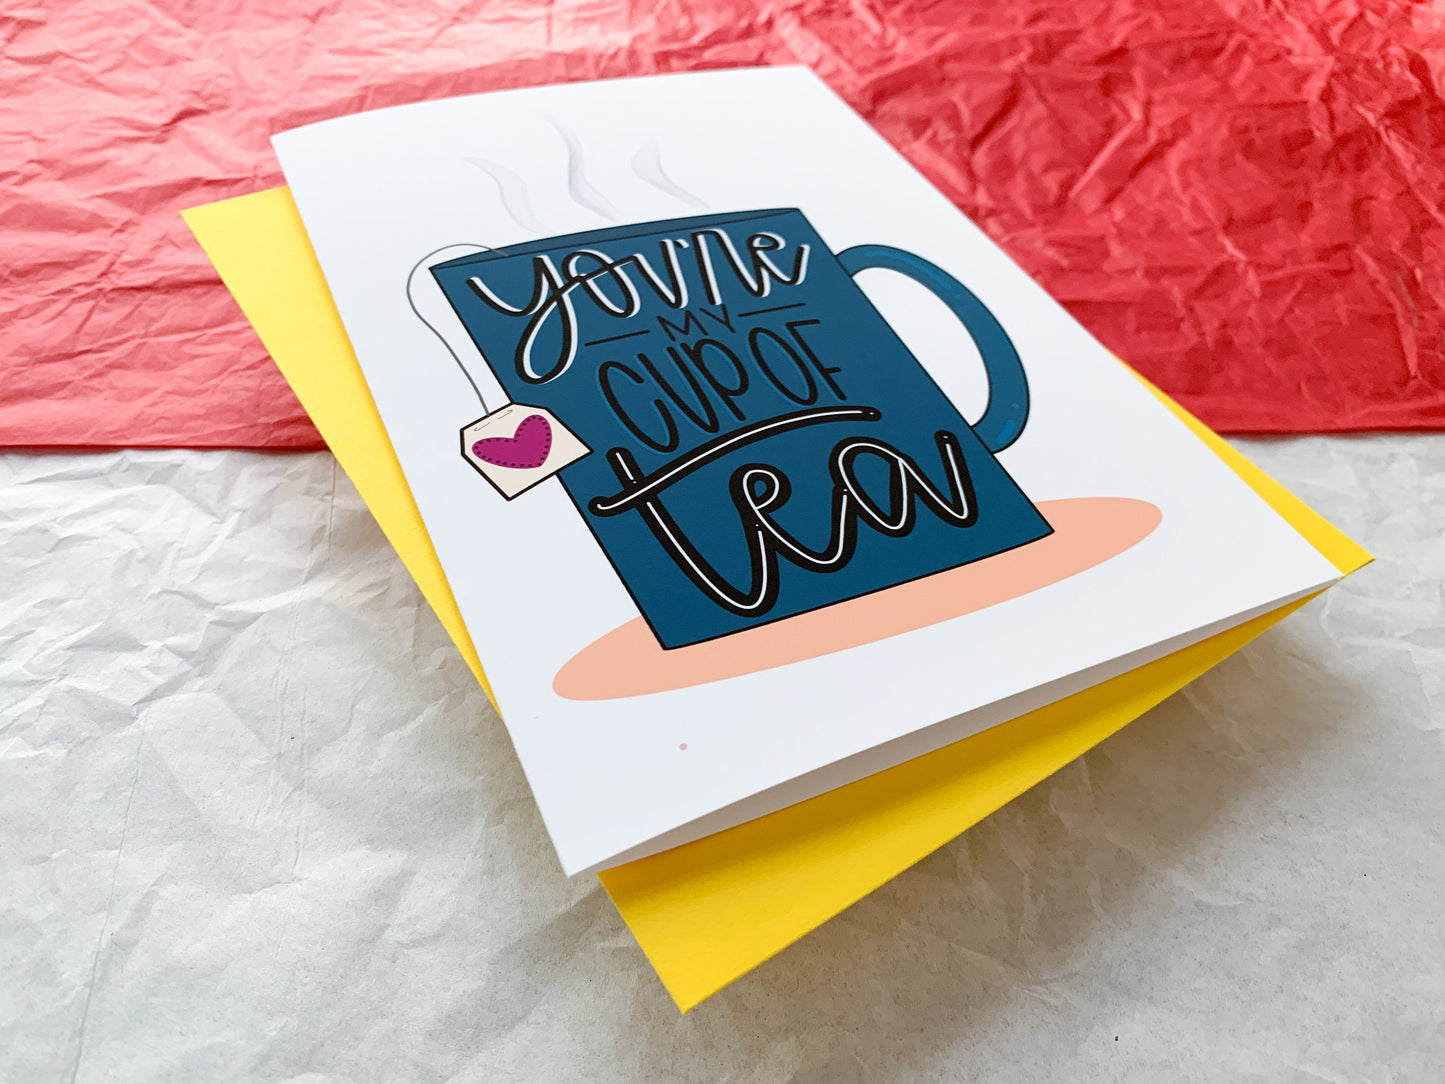 You're My Cup of Tea Handmade I Love You Card by StoneDonut Design